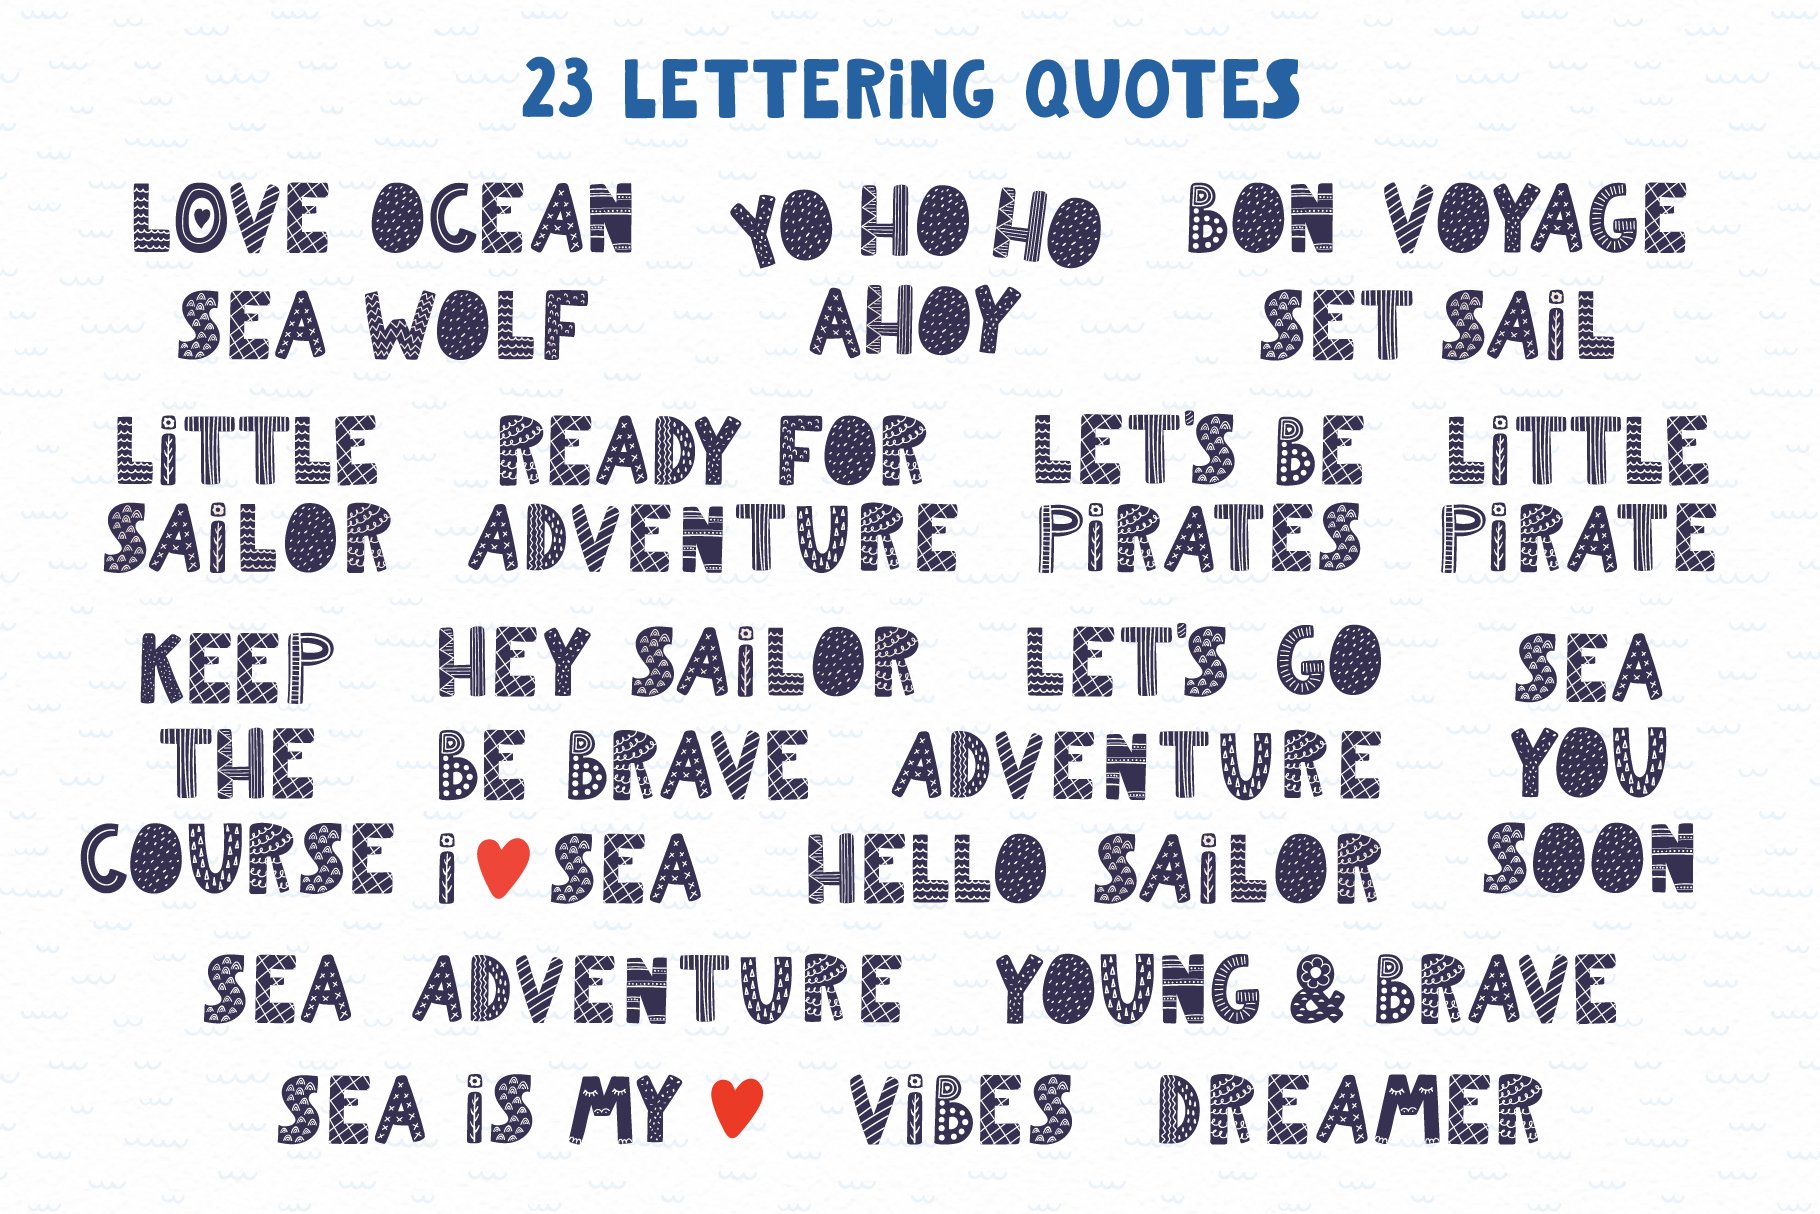 Some lettering quotes.